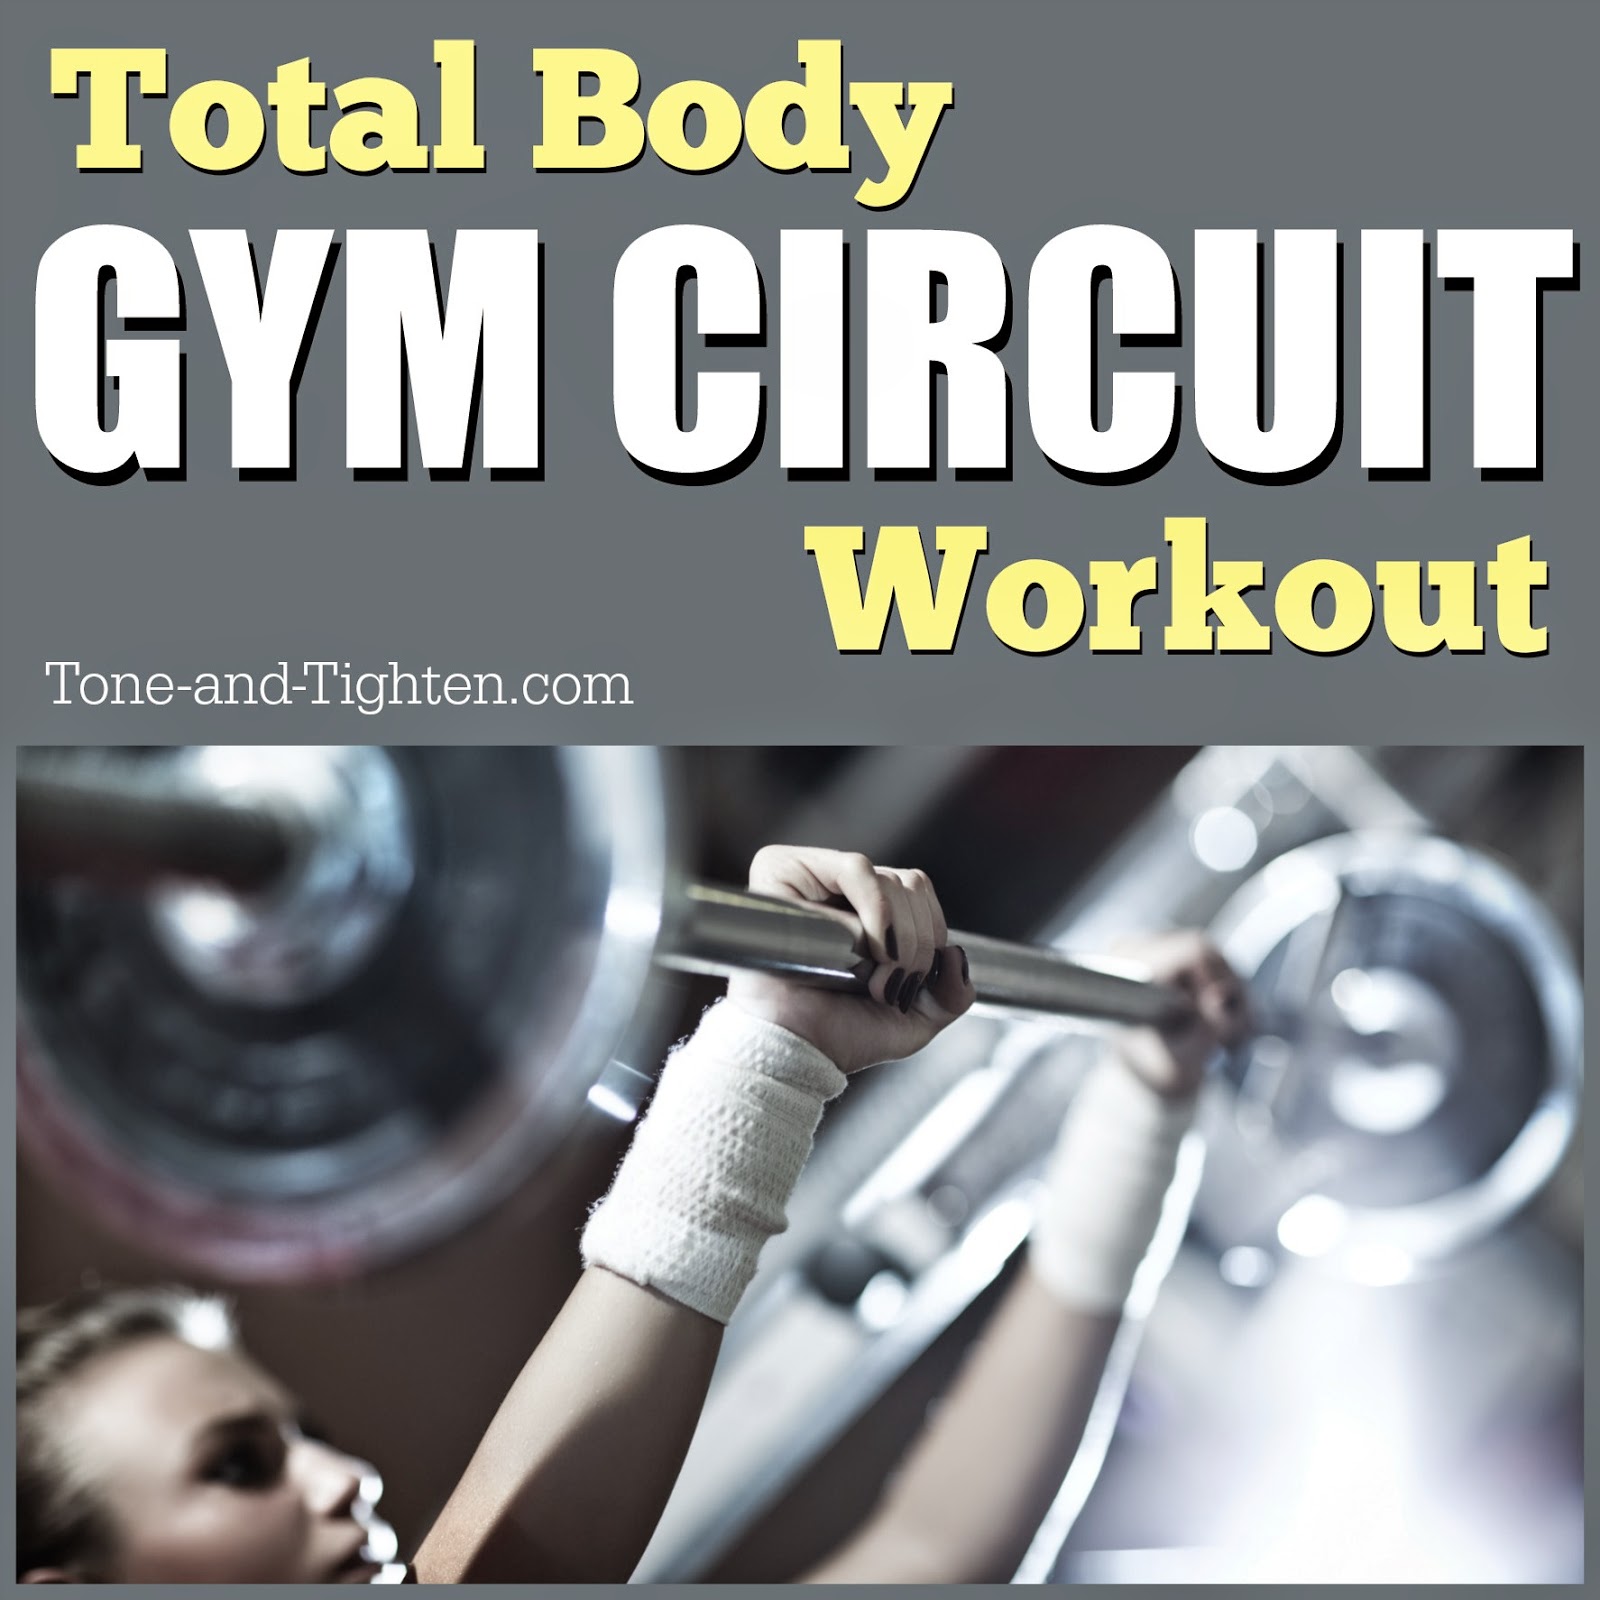 Gym Circuit Workout – The best, most efficient way to get in a great lift in a hurry!